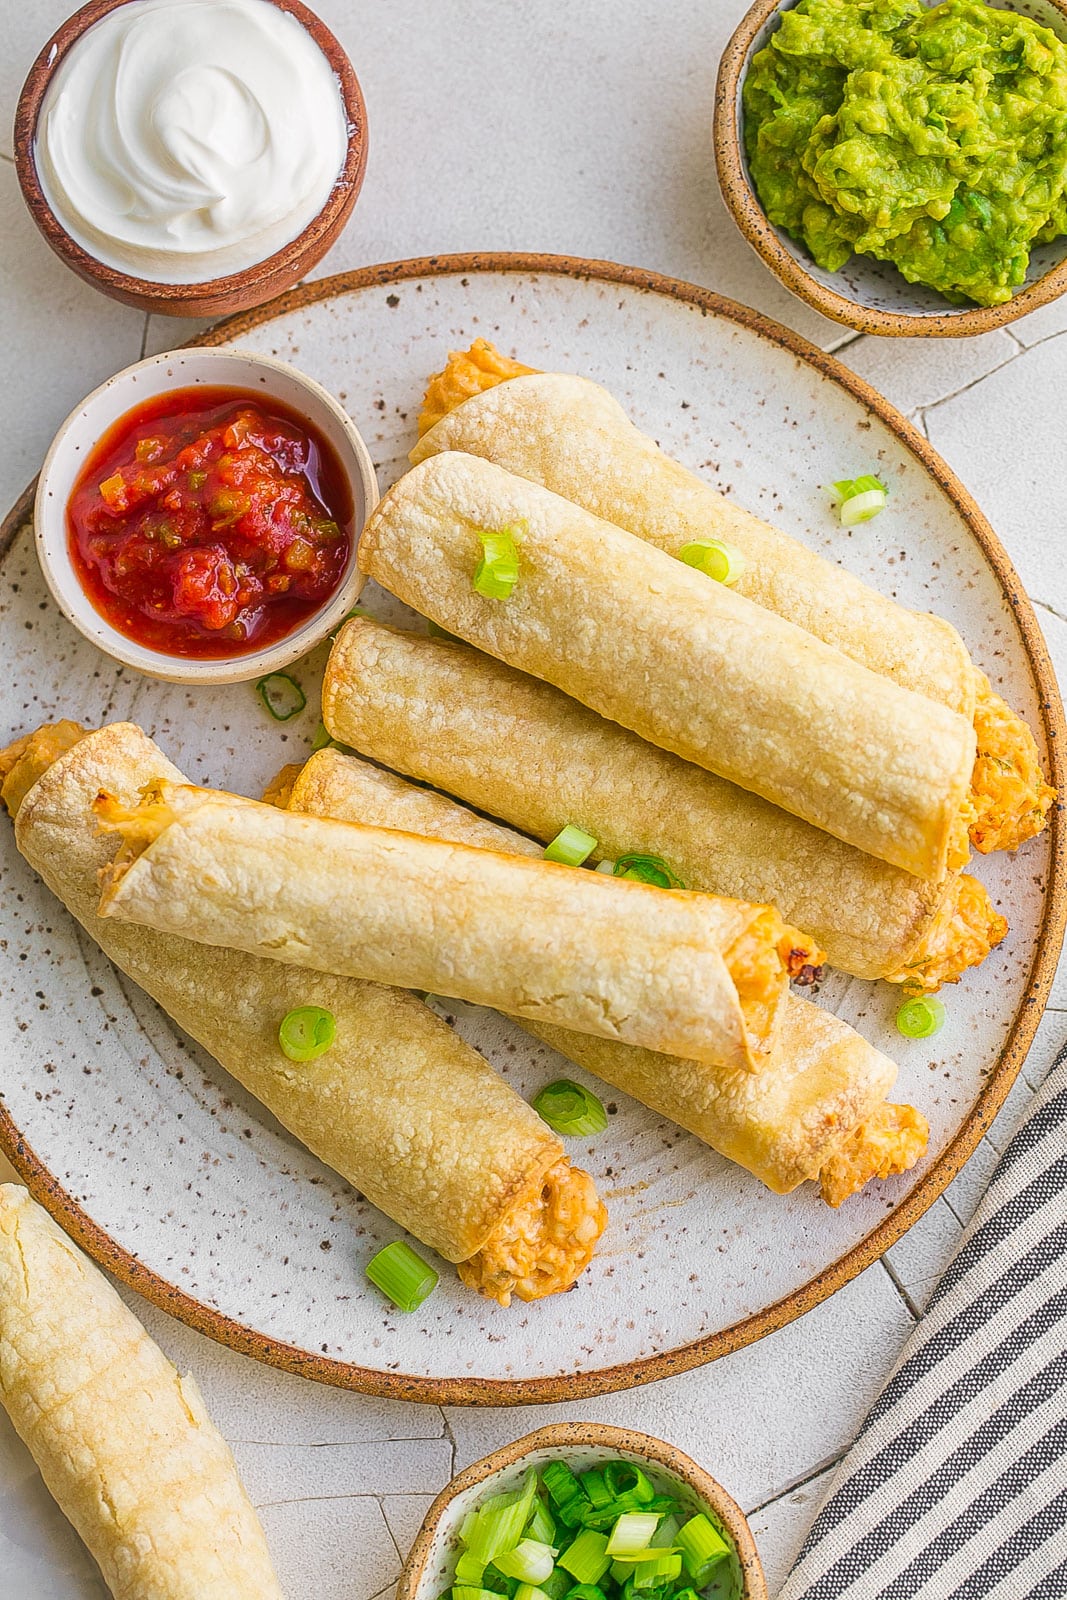 Taquitos on a plate with a side of salsa.